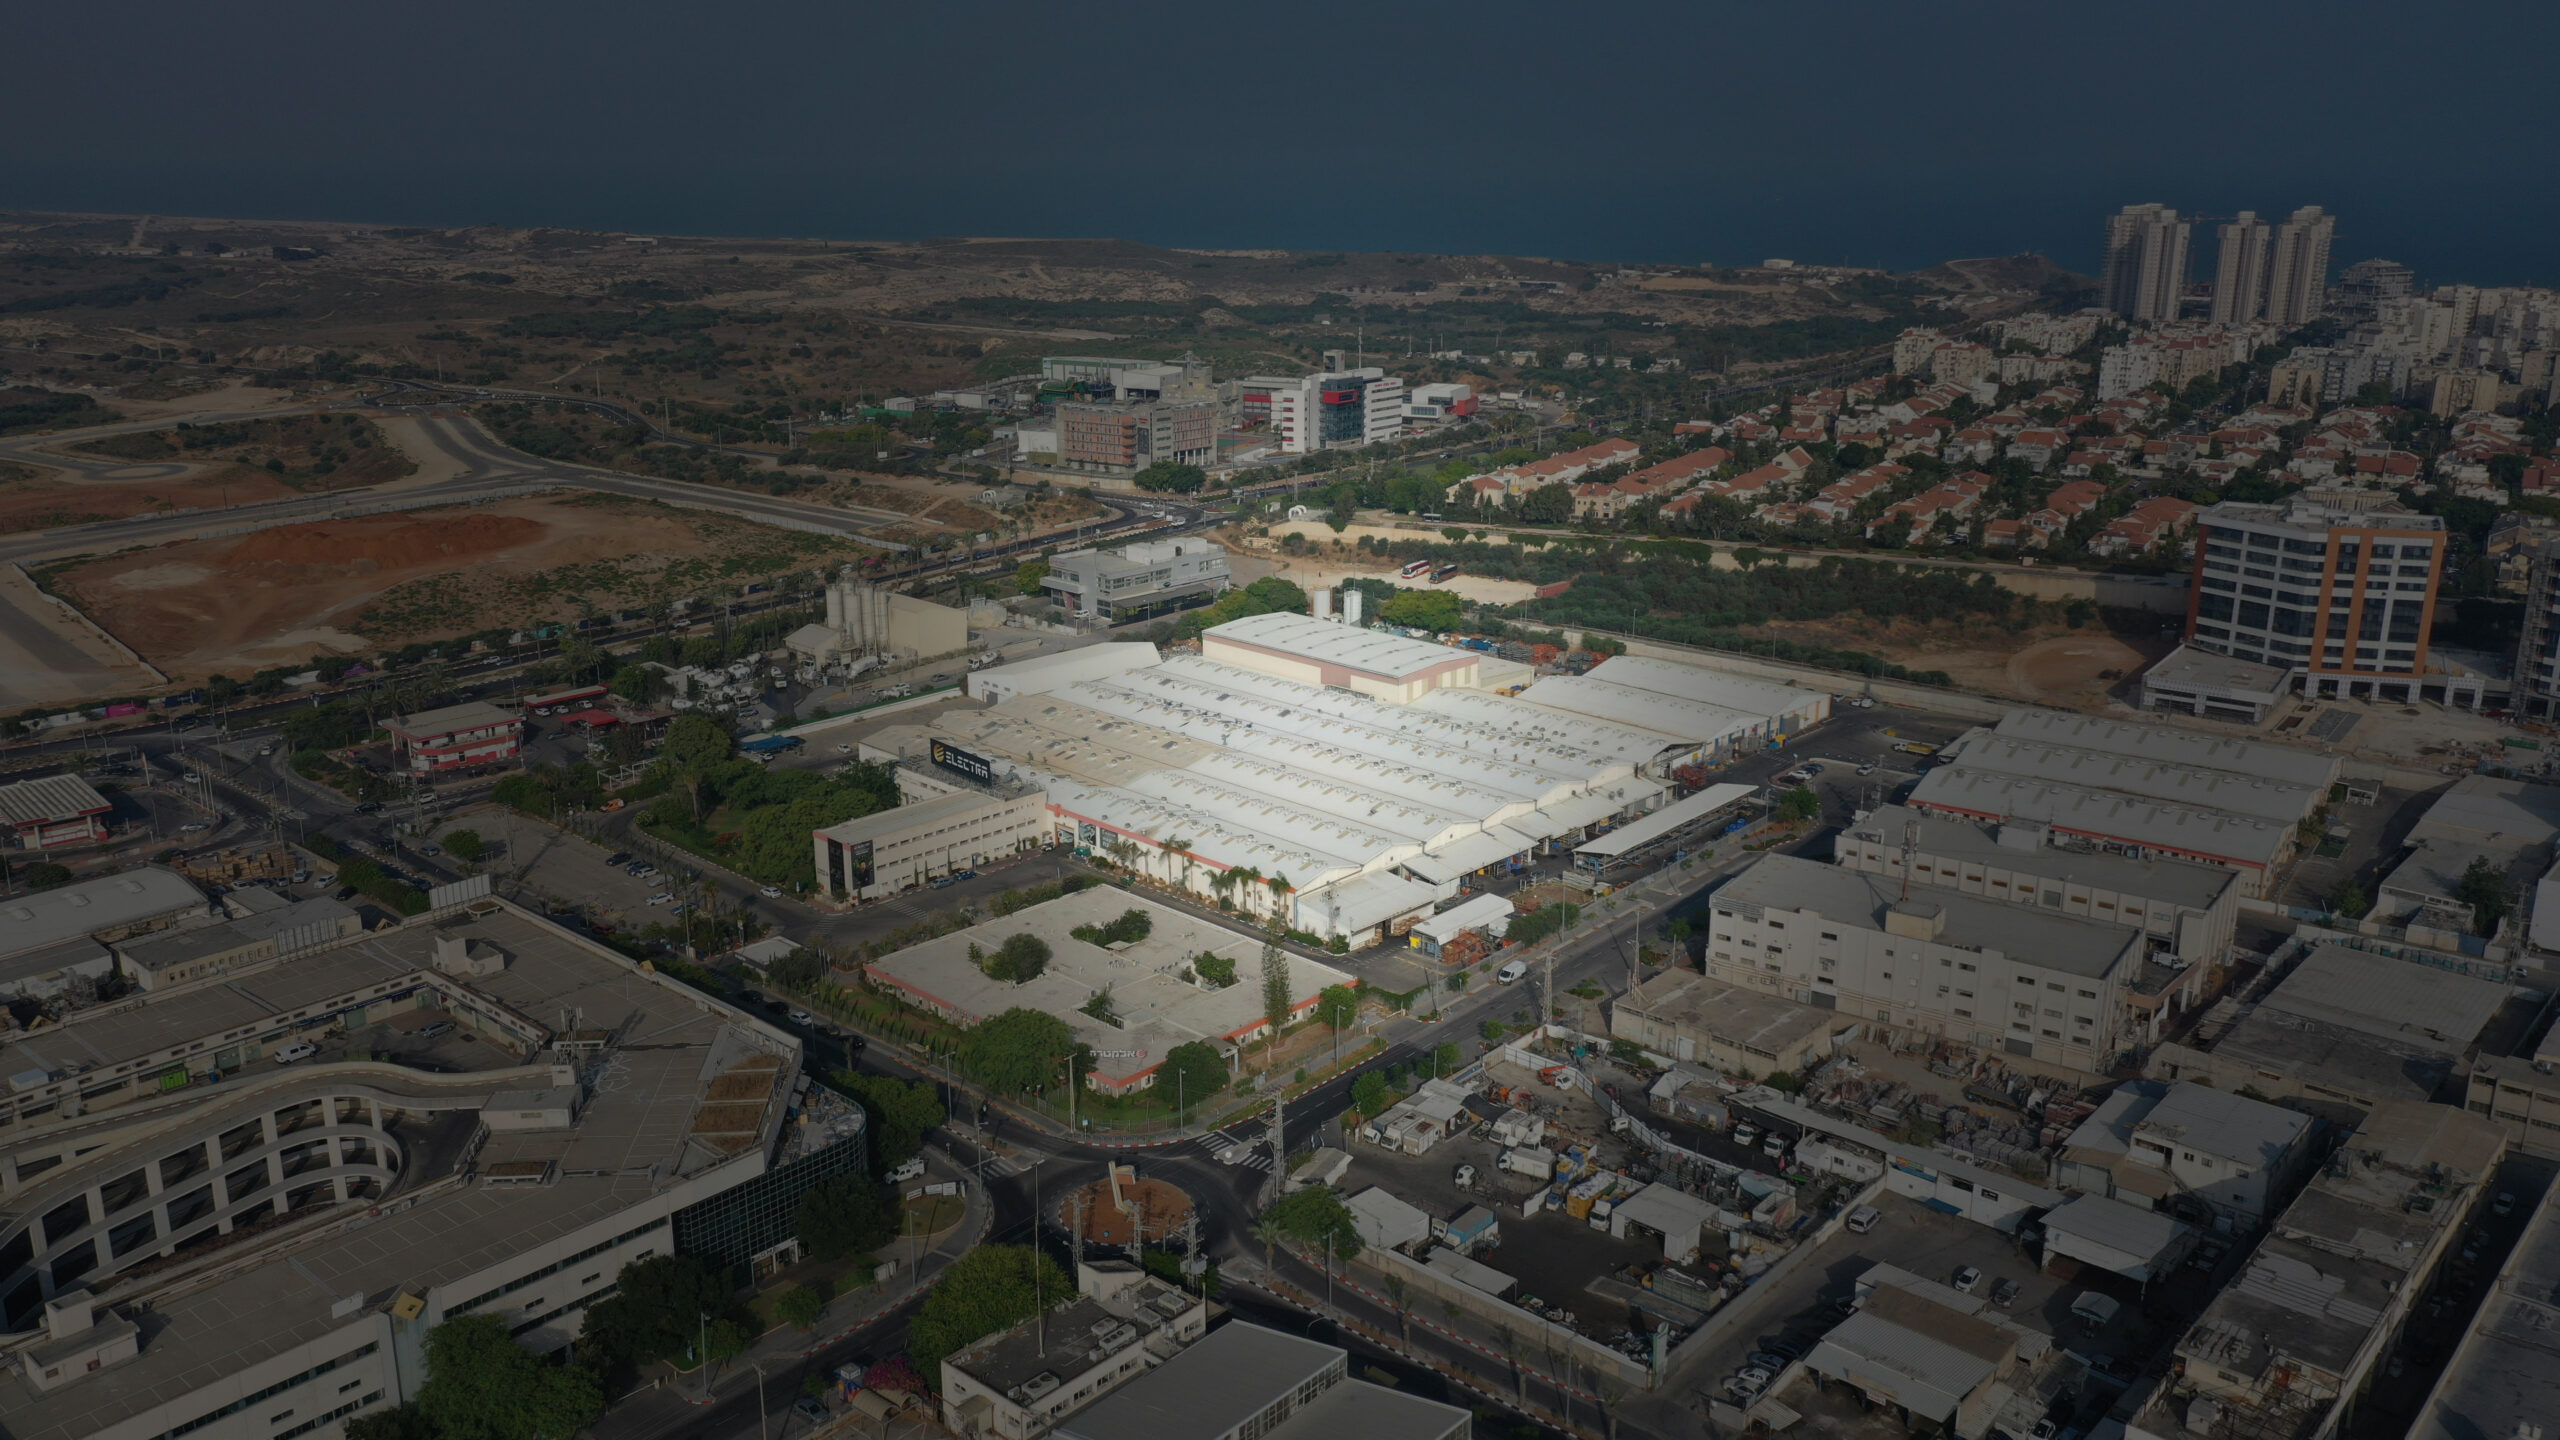 Electra Compound: A value-add project in Rishon LeZion transforming the industrial compound into a mixed-use complex, in collaboration with Electra and the Rishon LeZion Municipality | Reality the Leading Group of Real Estate Investment Funds in Israel